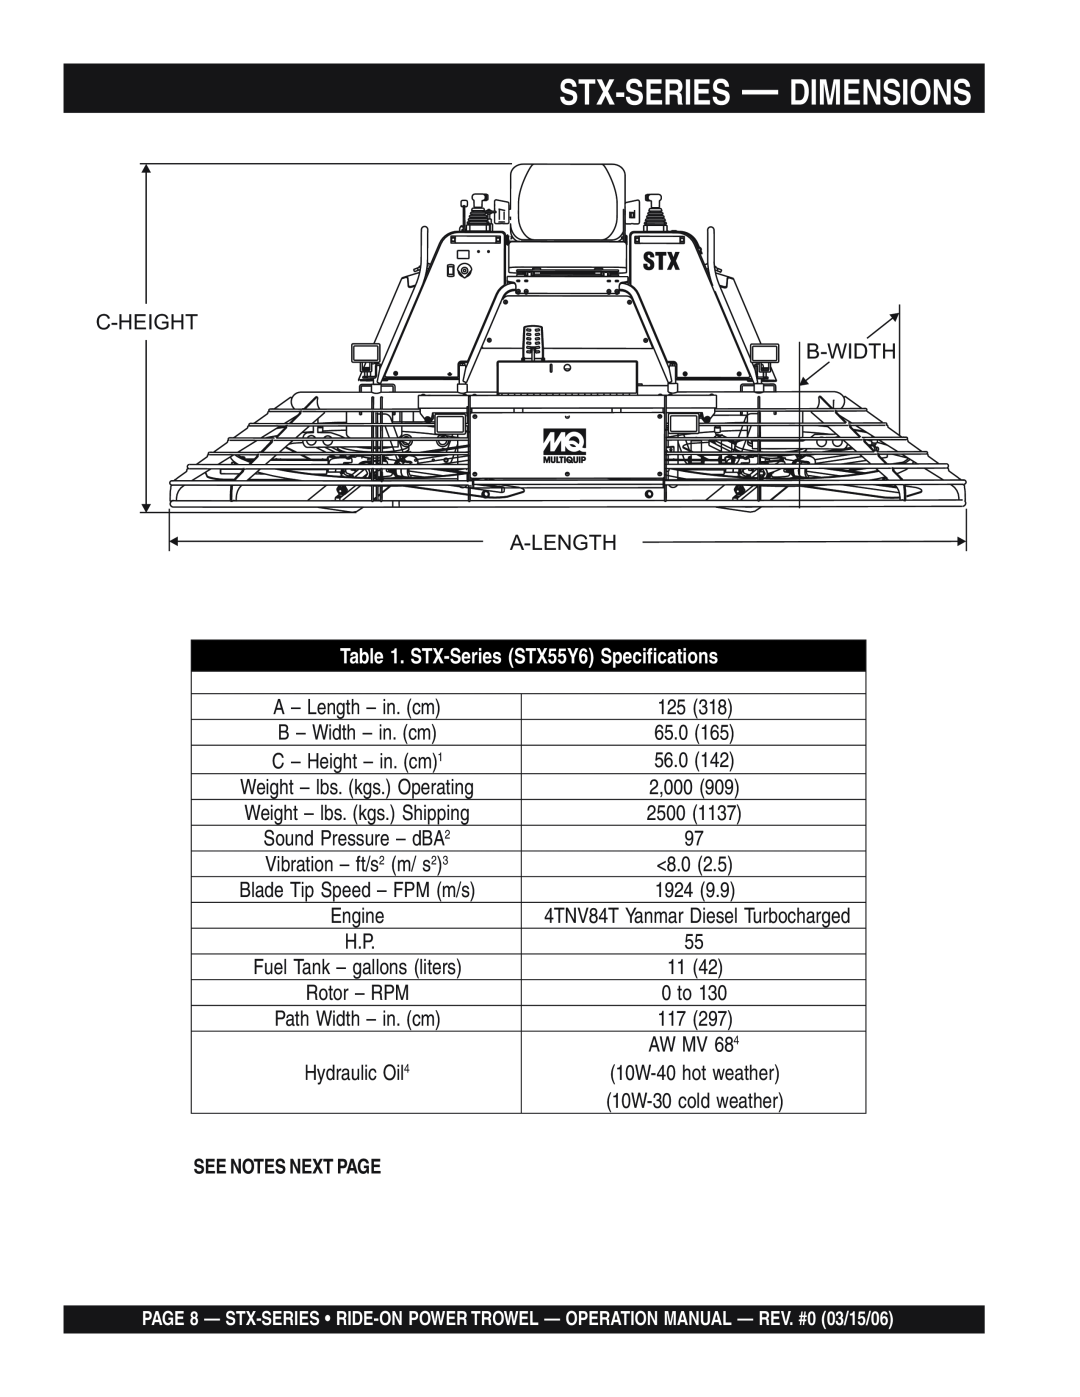 Multiquip Stx-Series - Dimensions, C-Height B-Width A-Length, STX-SeriesSTX55Y6 Specifications, See Notes Next Page 